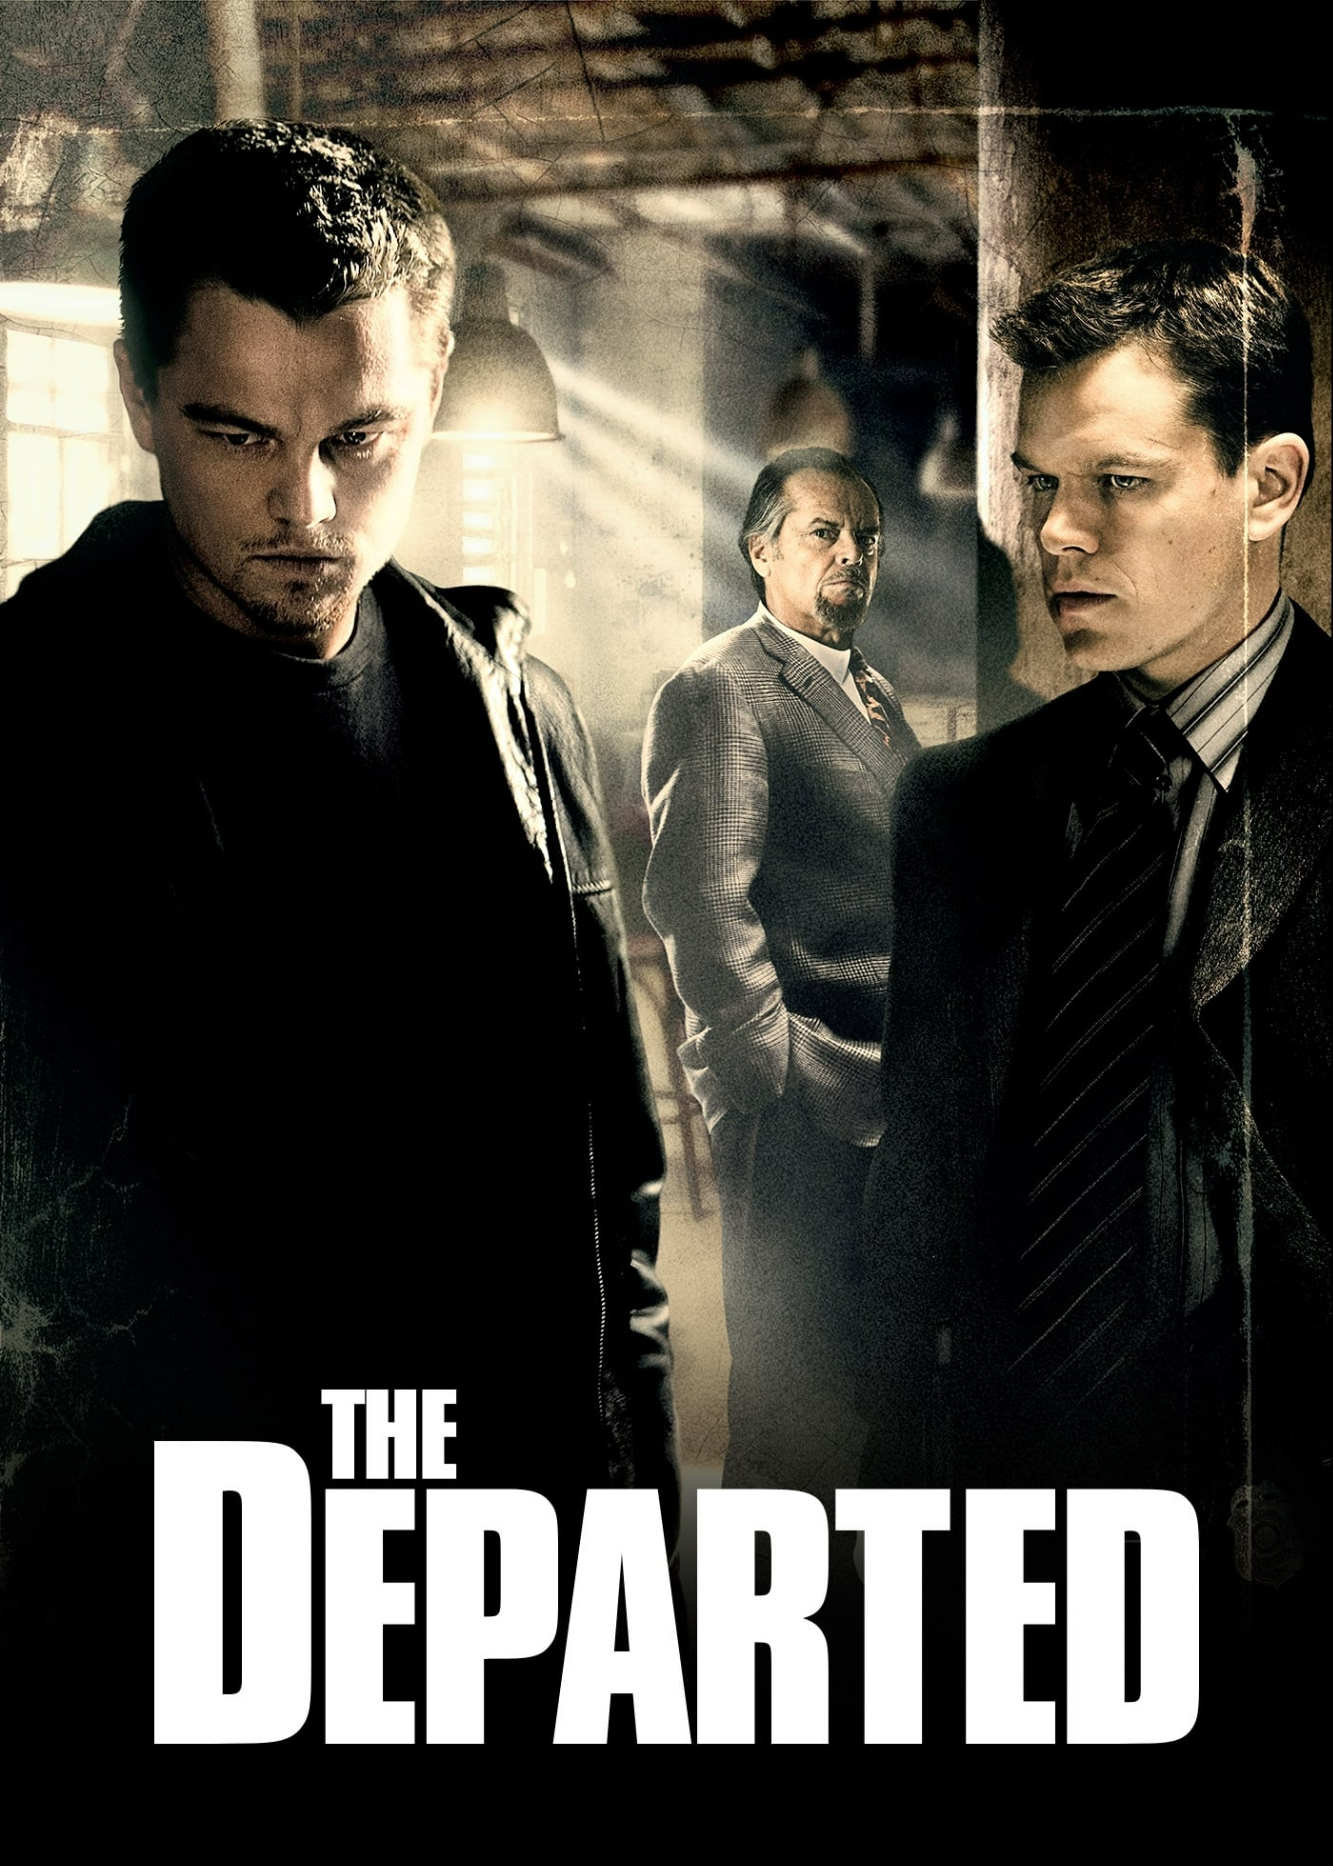 Poster Phim Điệp Vụ Boston (The Departed)